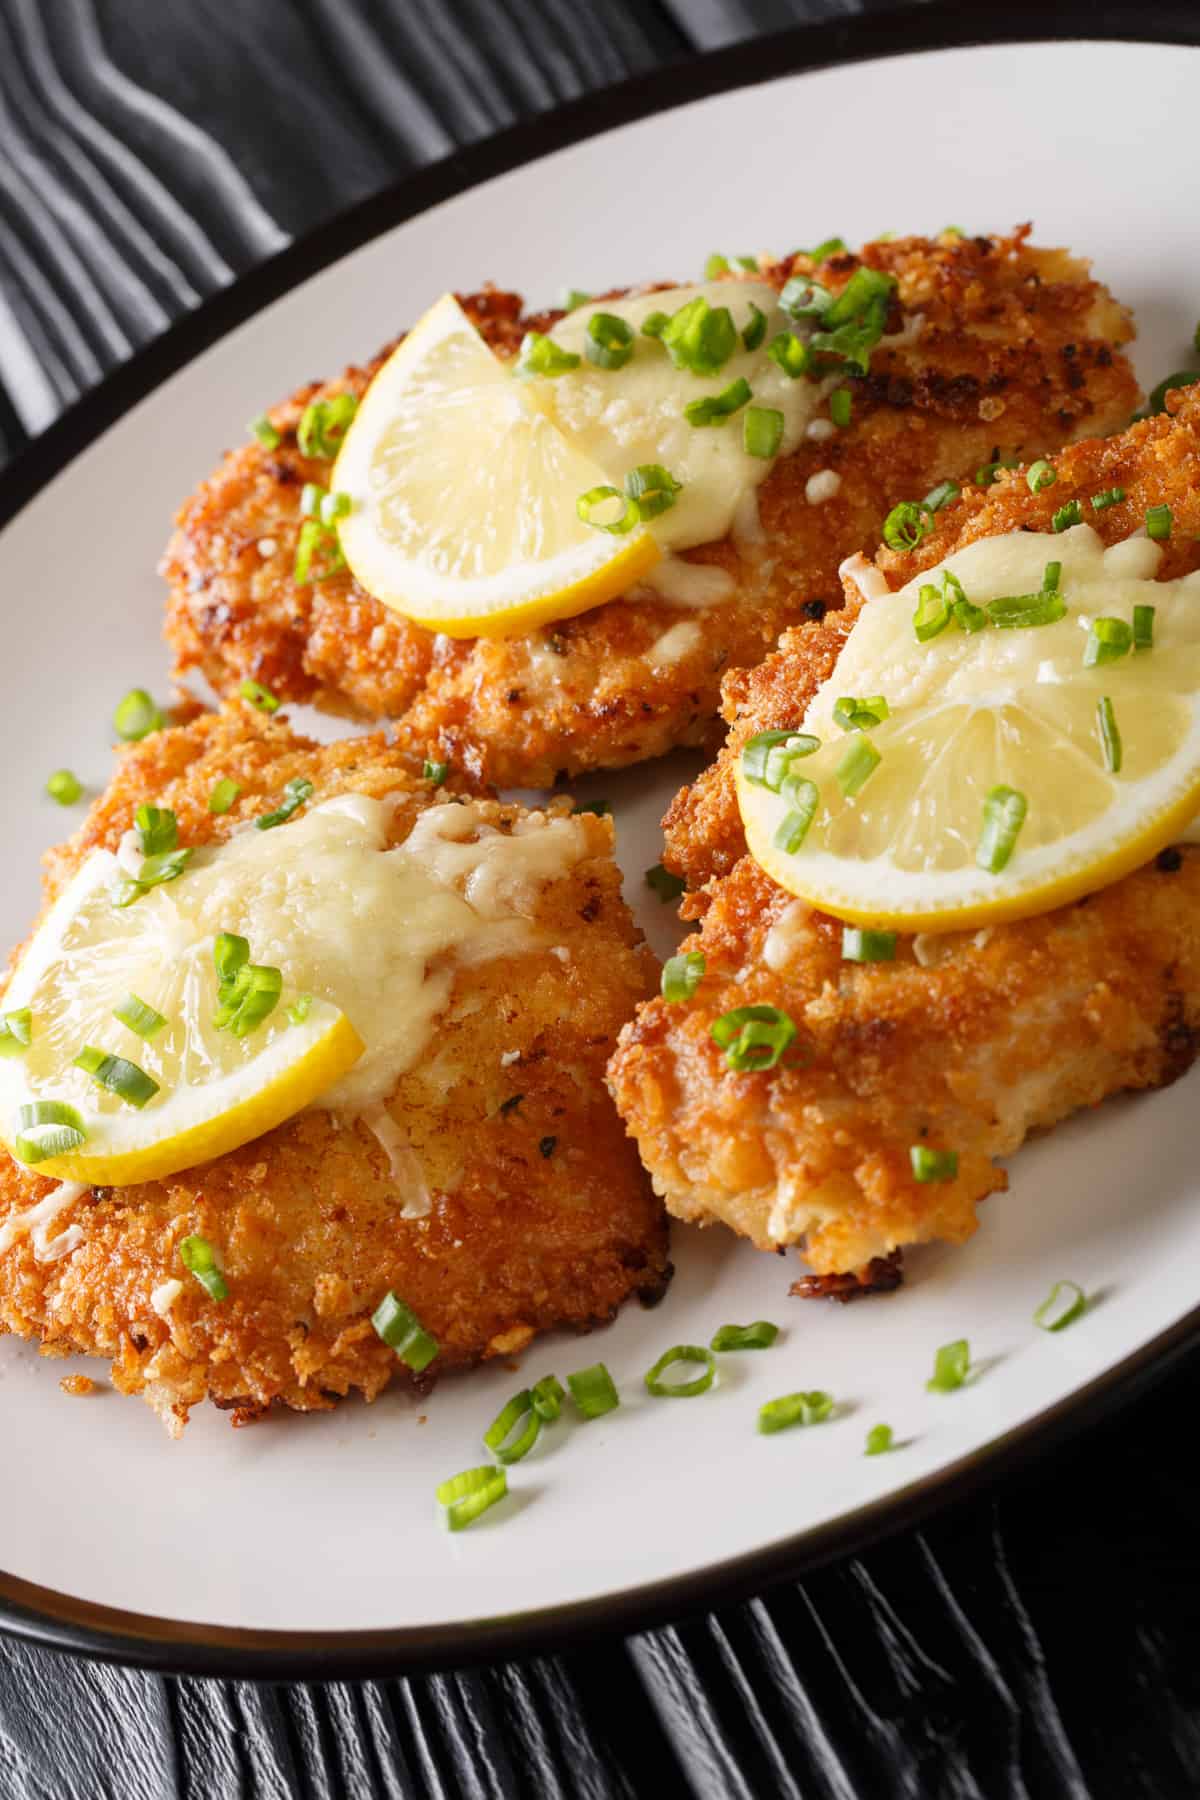 Breaded chicken breasts arranged on a plate and topped with lemon slices.